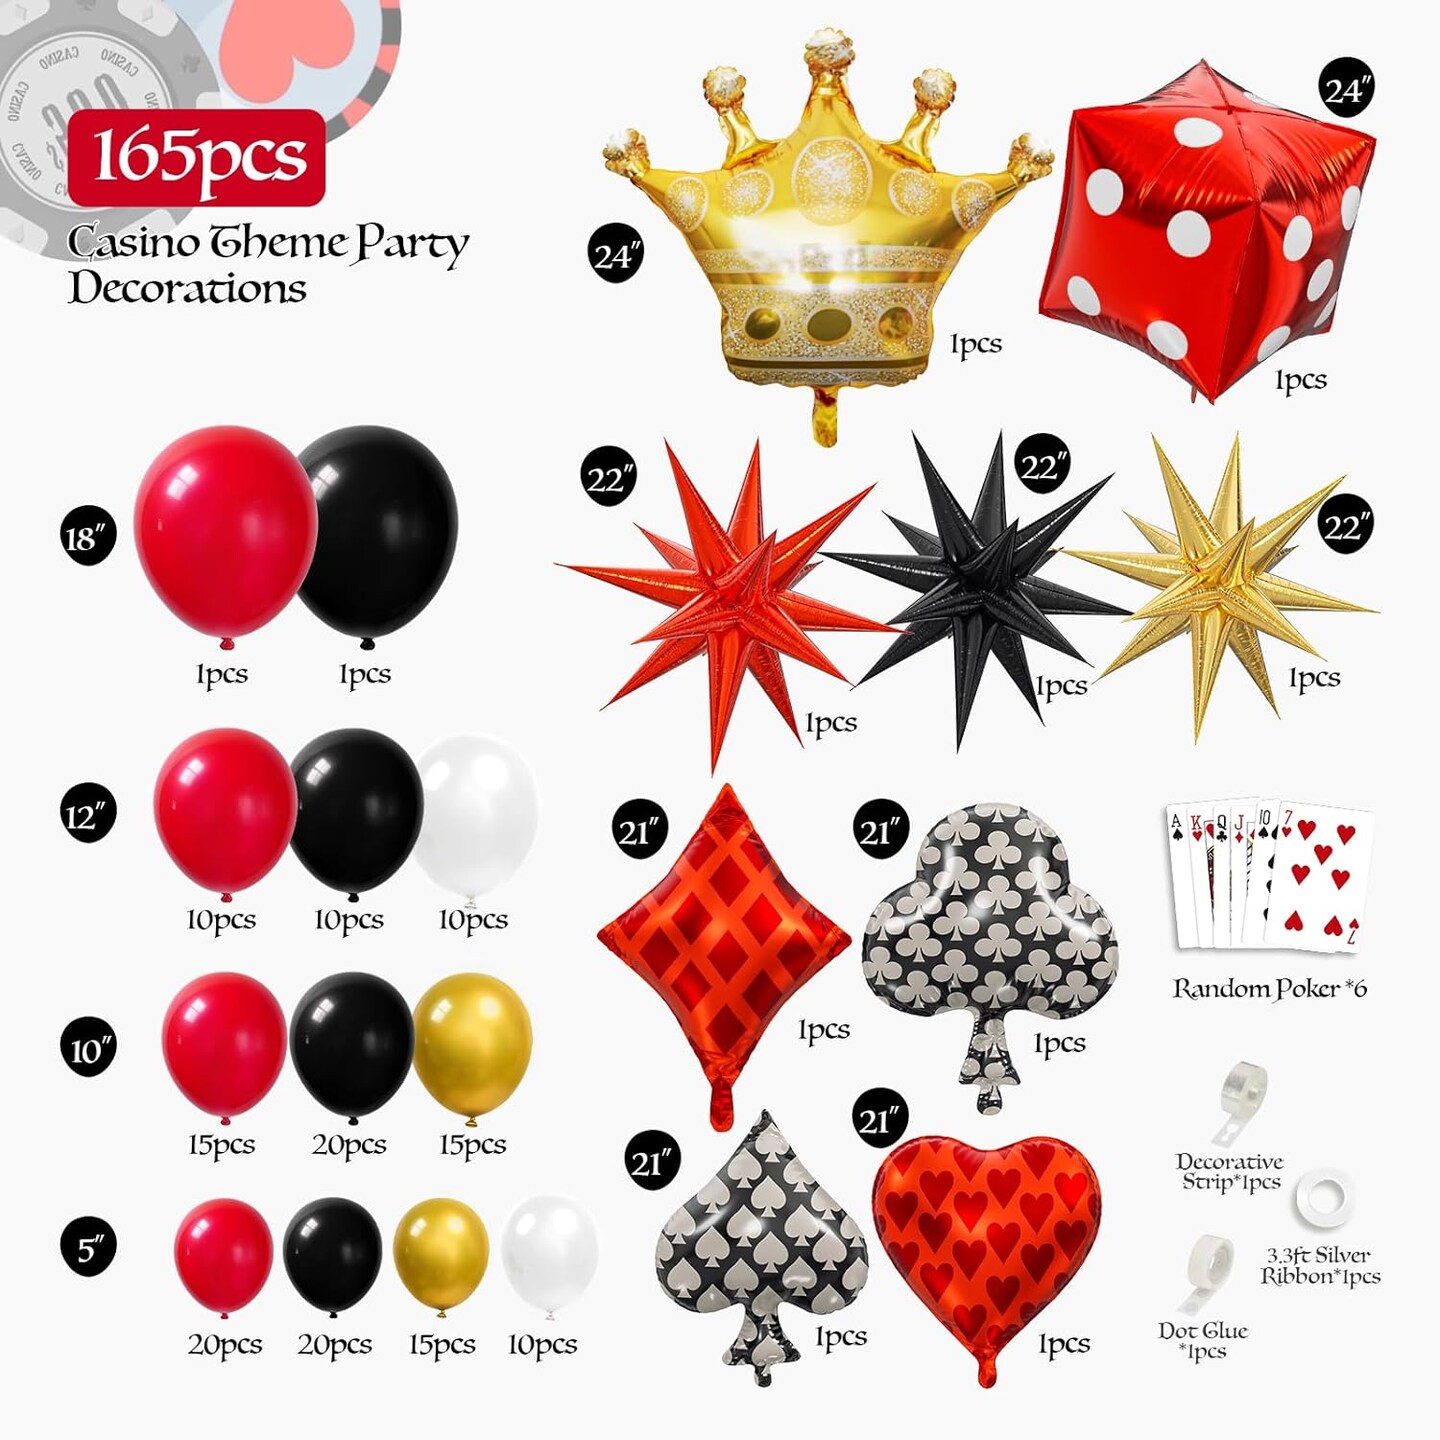 165pcs Casino Balloon Arch Garland Kit, Red Black Gold Balloons with Starburst Crown Dice Poker Foil Balloons for Birthday Casino Night Las Vegas Casino Theme Party Decorations